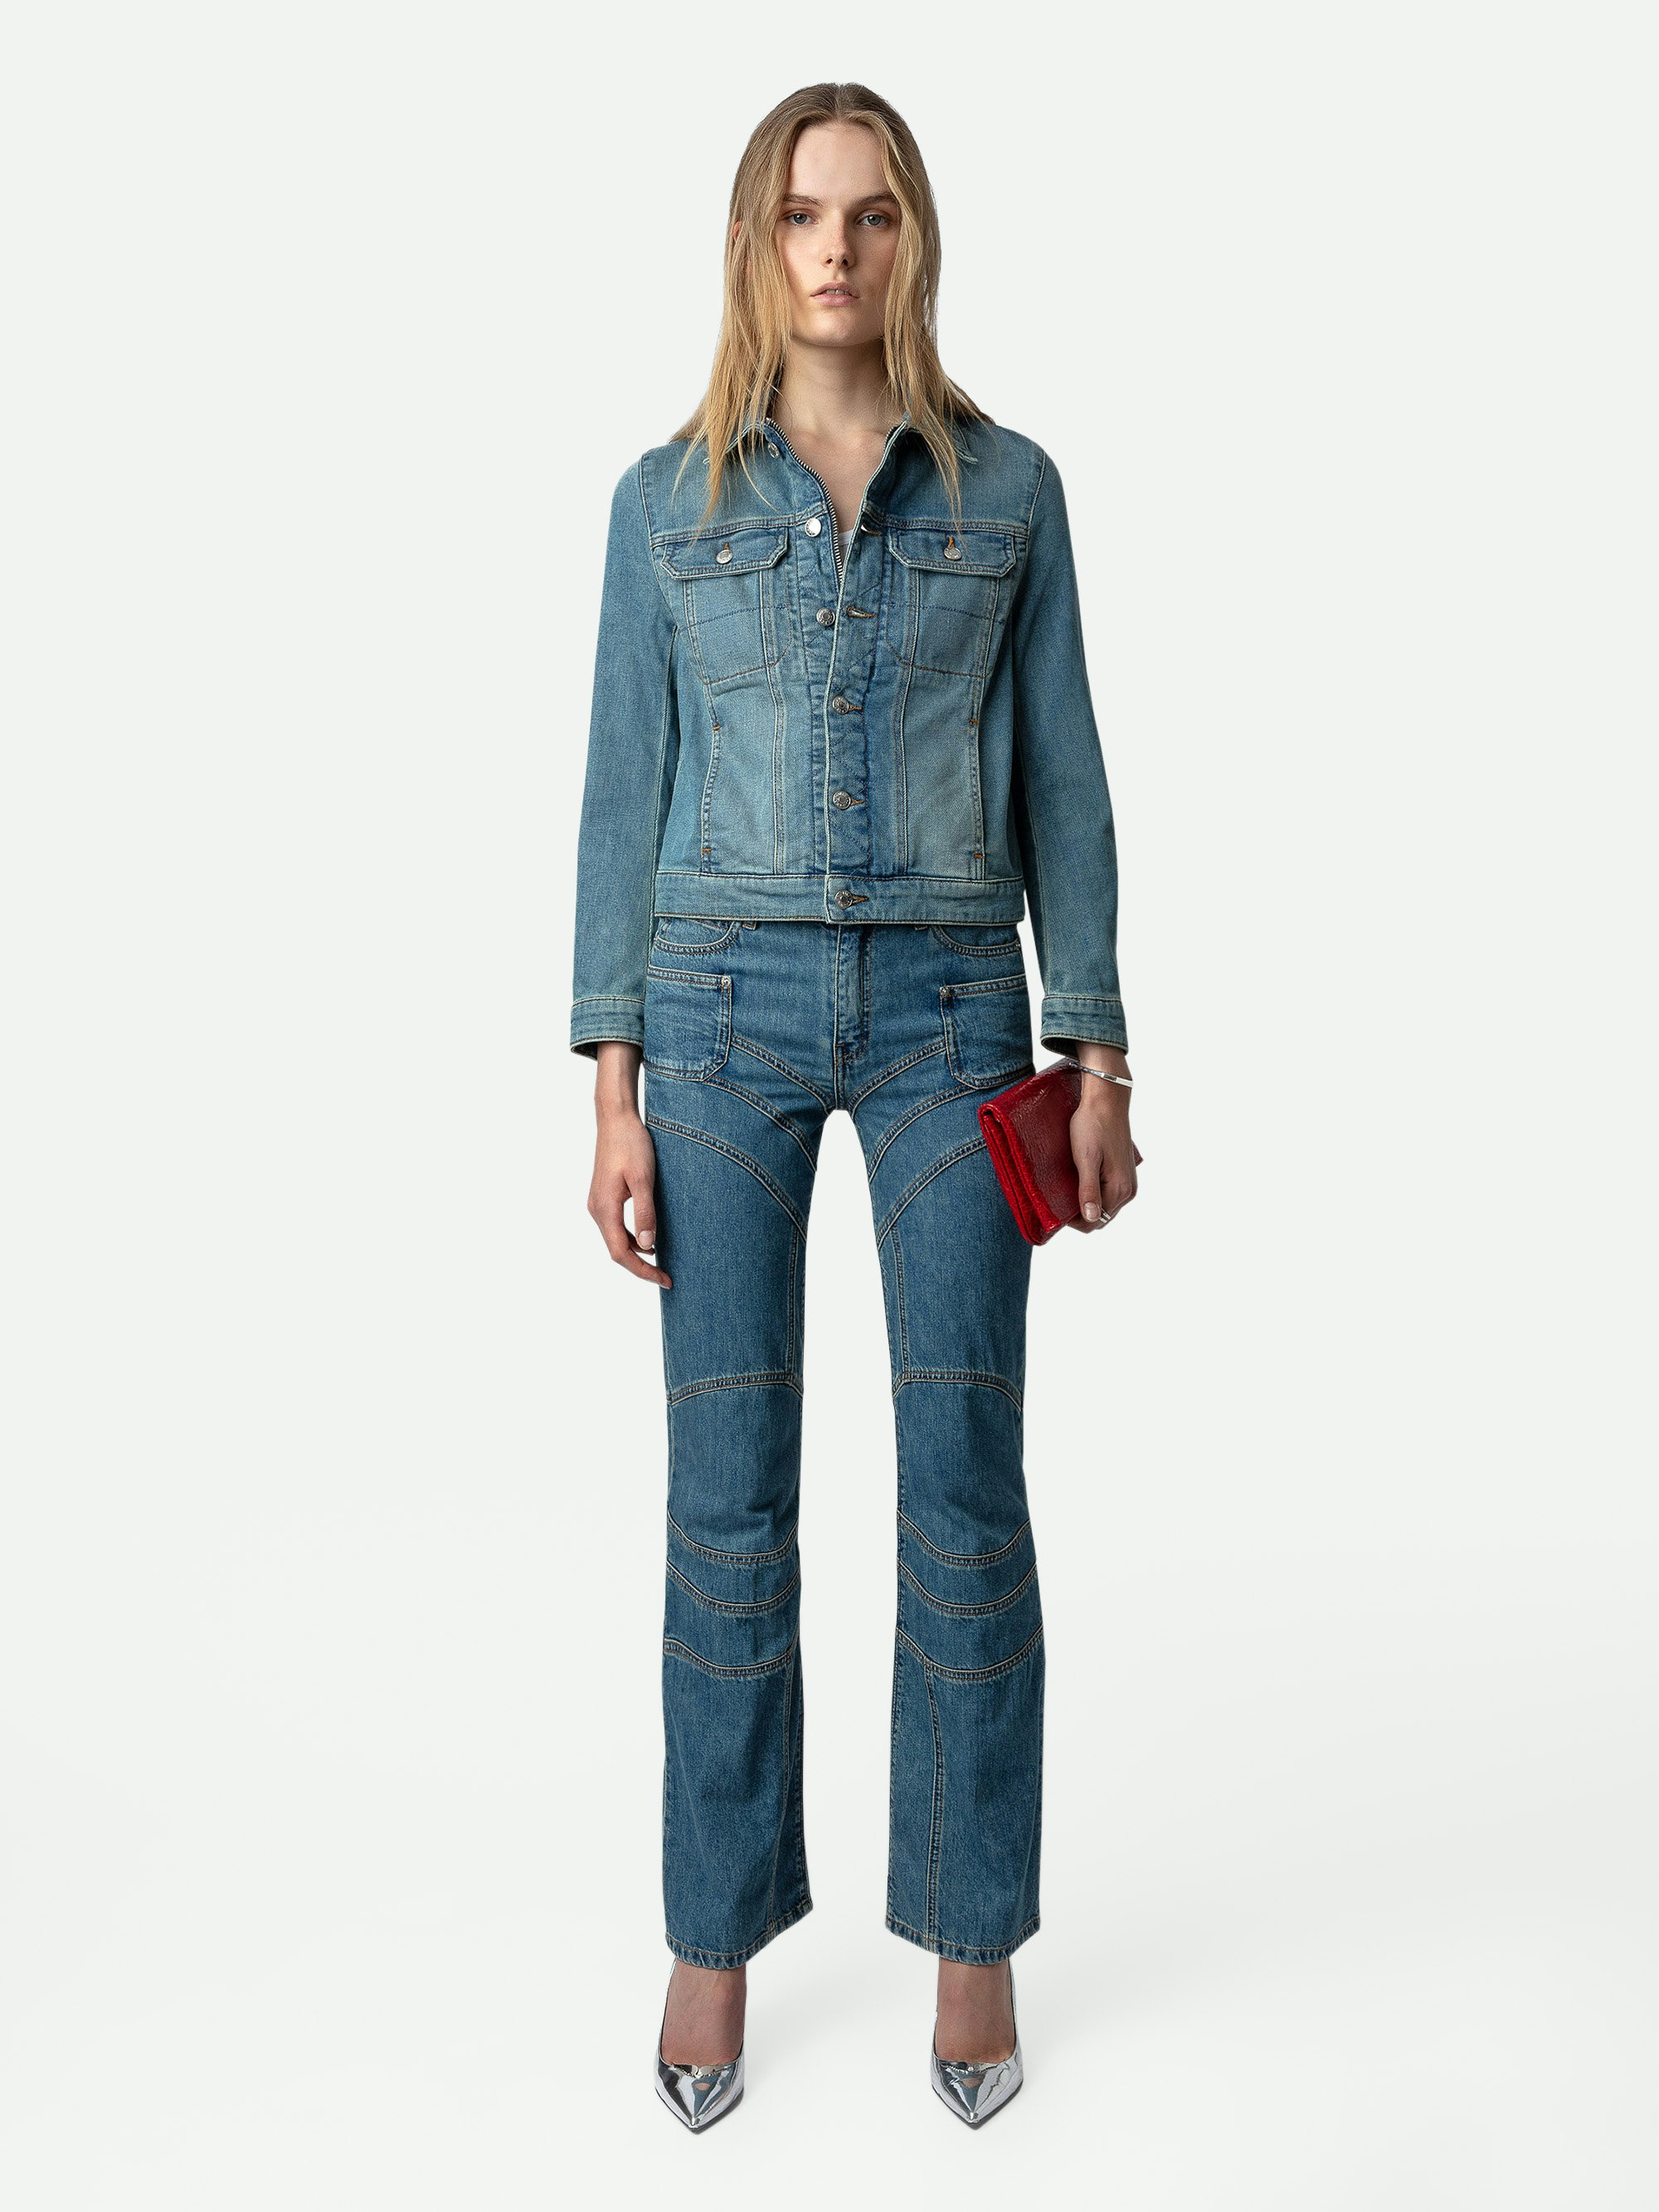 Elvira Jeans - Blue denim loose-fitting jeans with pockets and overstitched details.